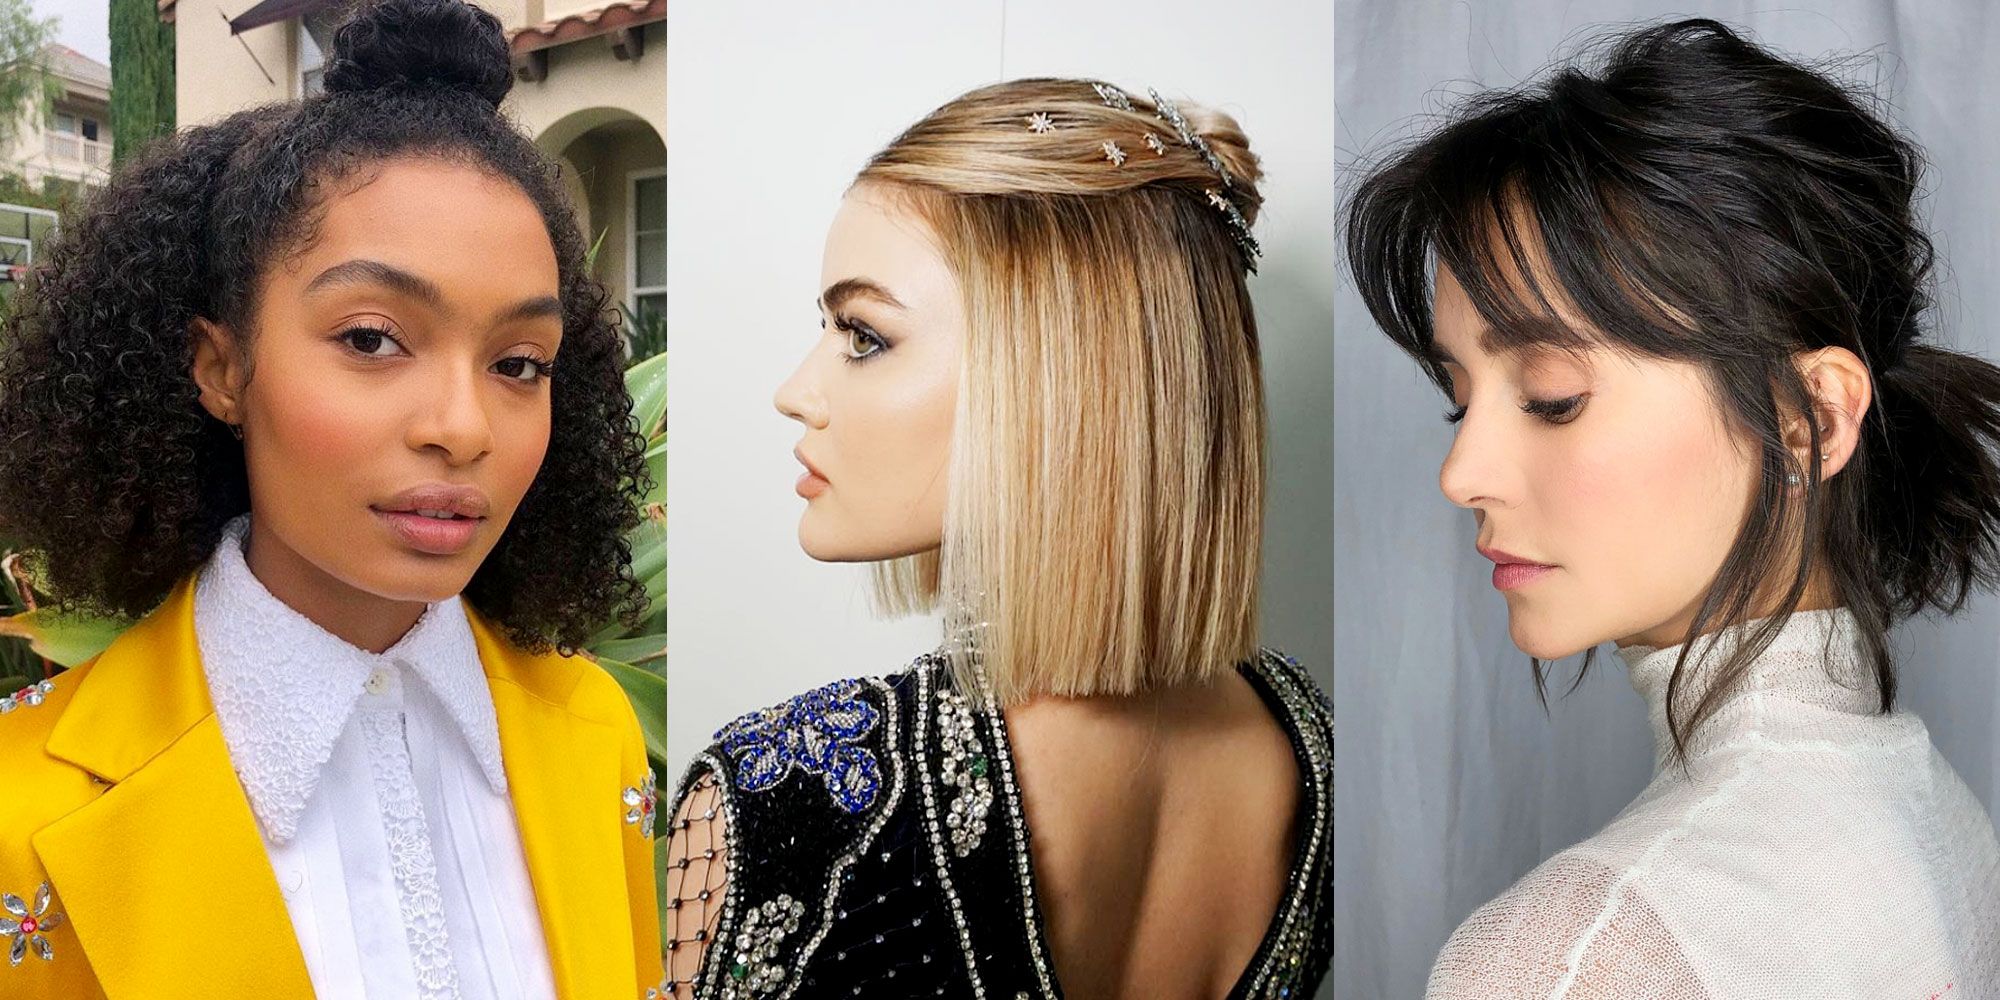 30 Chic Hairstyles for Oblong Face Shapes, According to Stylists